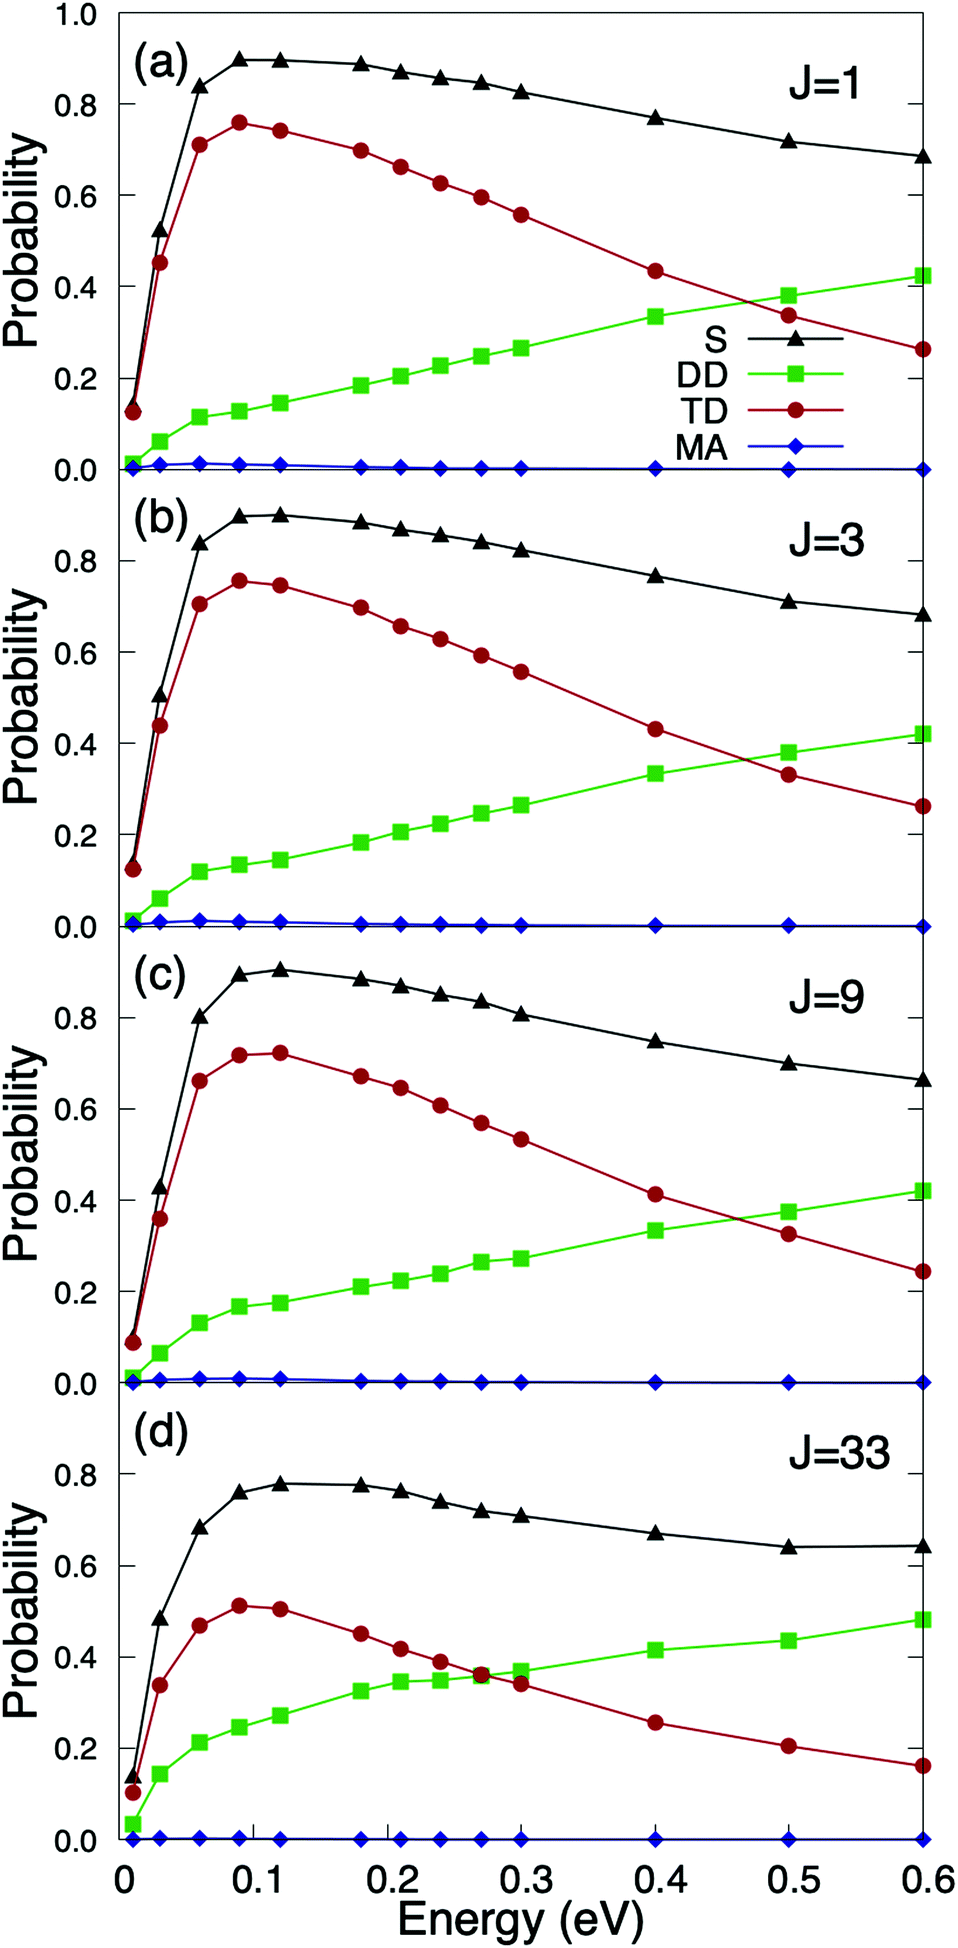 Normal And Off Normal Incidence Dissociative Dynamics Of O2 V J On Ultrathin Cu Films Grown On Ru 0001 Physical Chemistry Chemical Physics Rsc Publishing